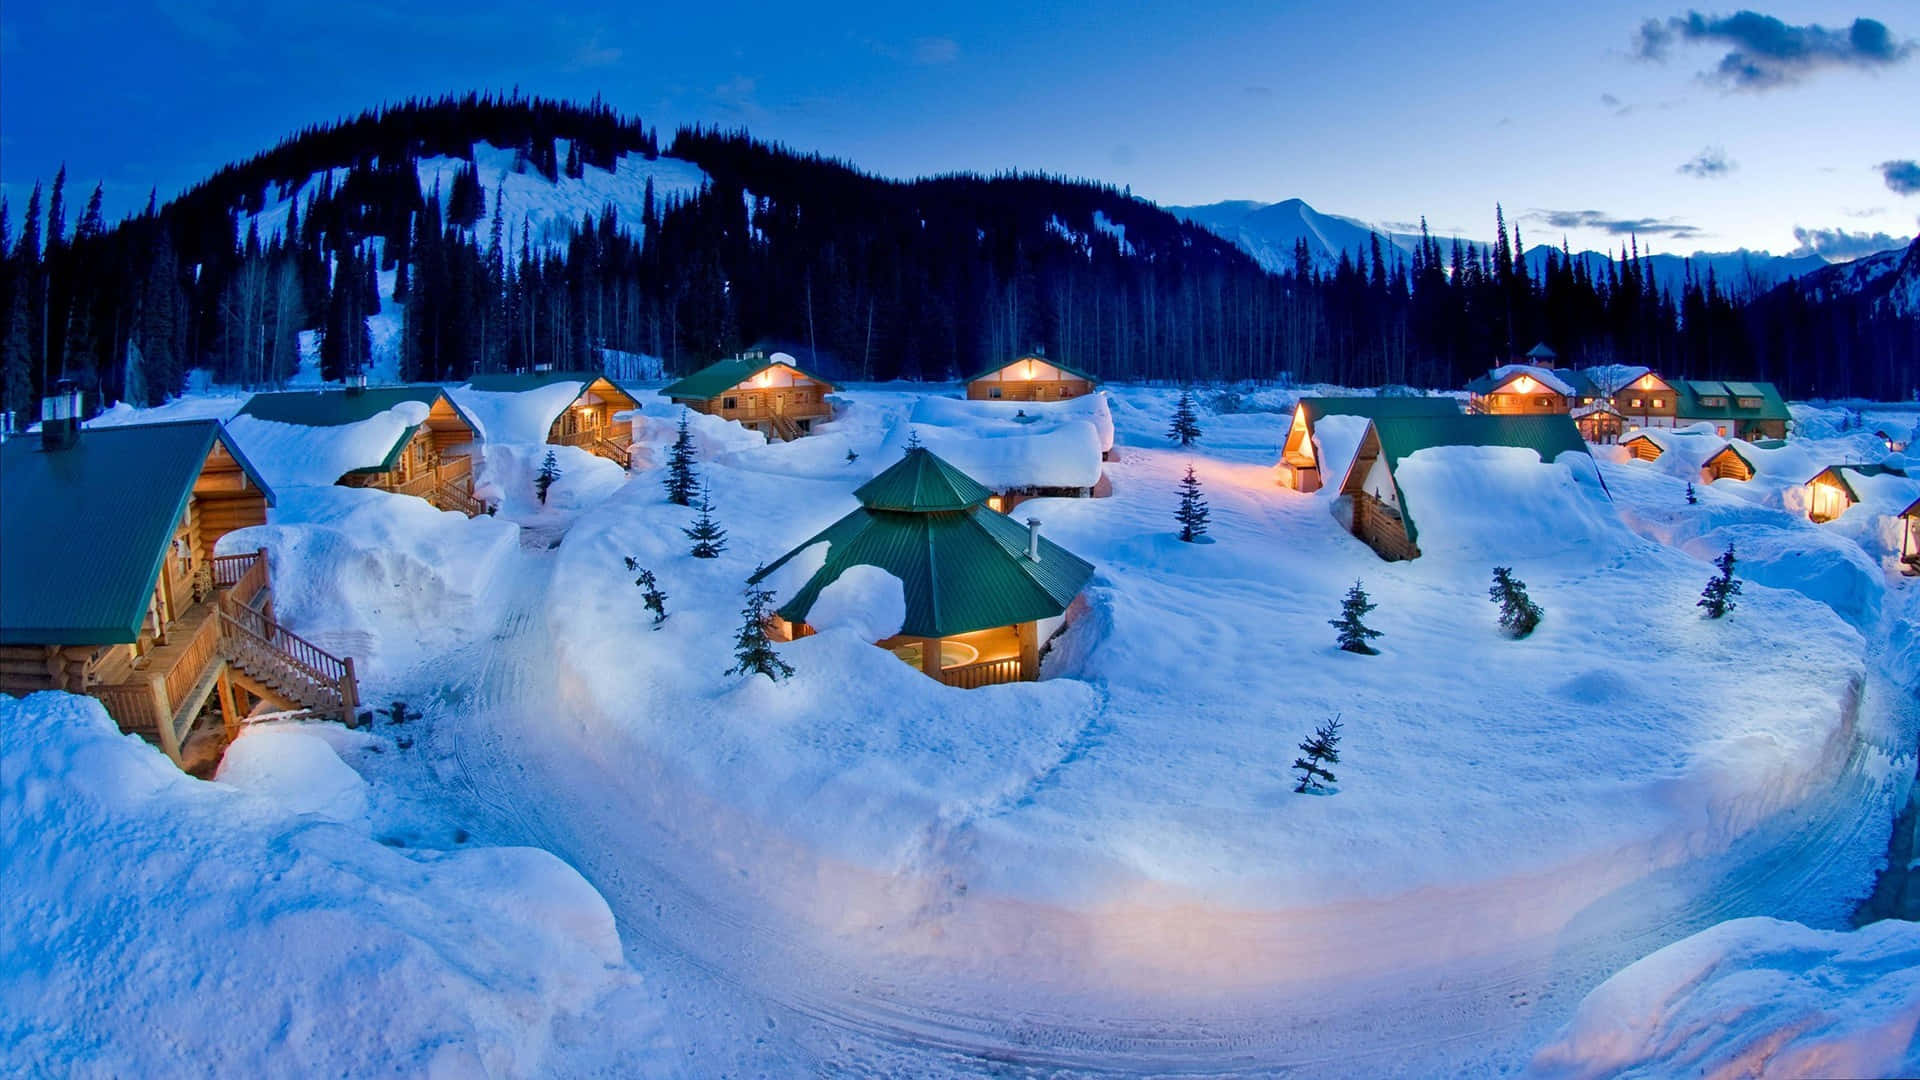 A Group Of Cabins In The Snow